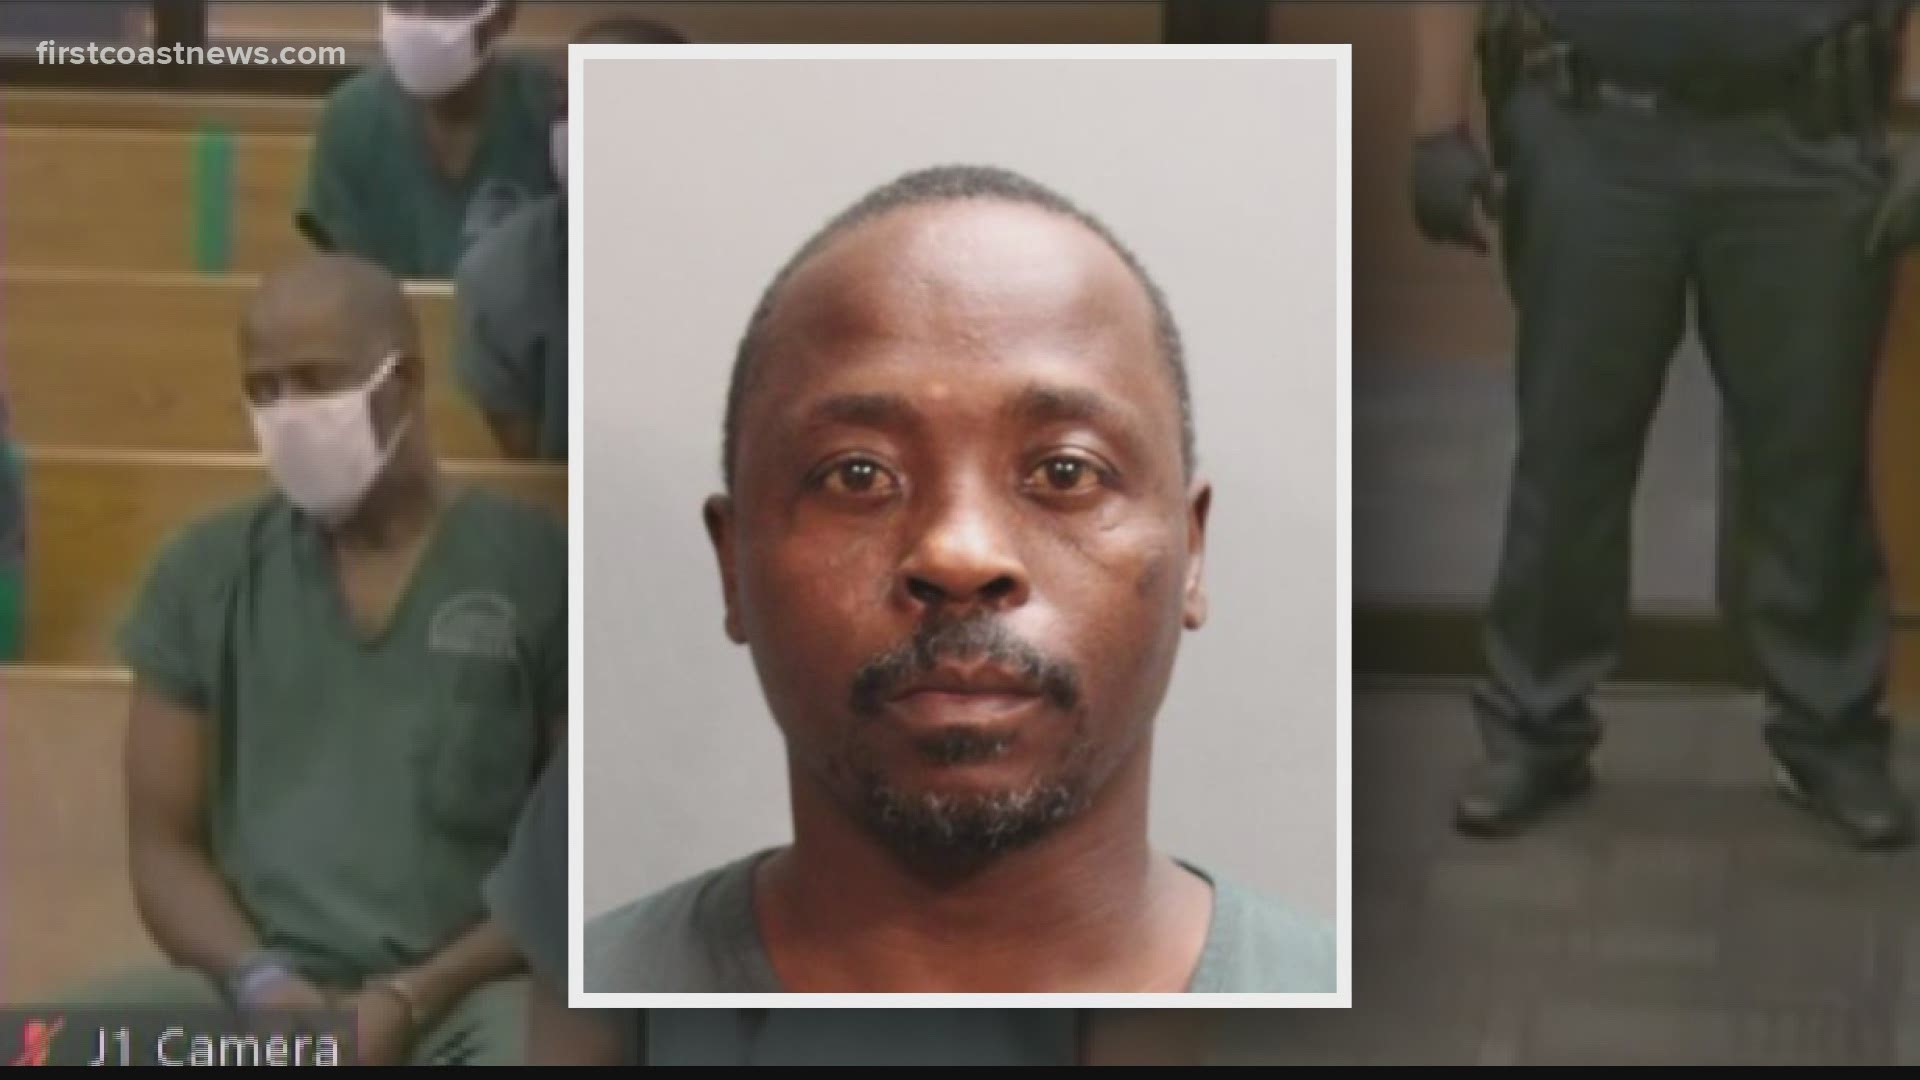 JSO arrested 47-year-old LaTerres Bryant on second-degree murder charges stemming from a March 1 death investigation in Talleyrand.